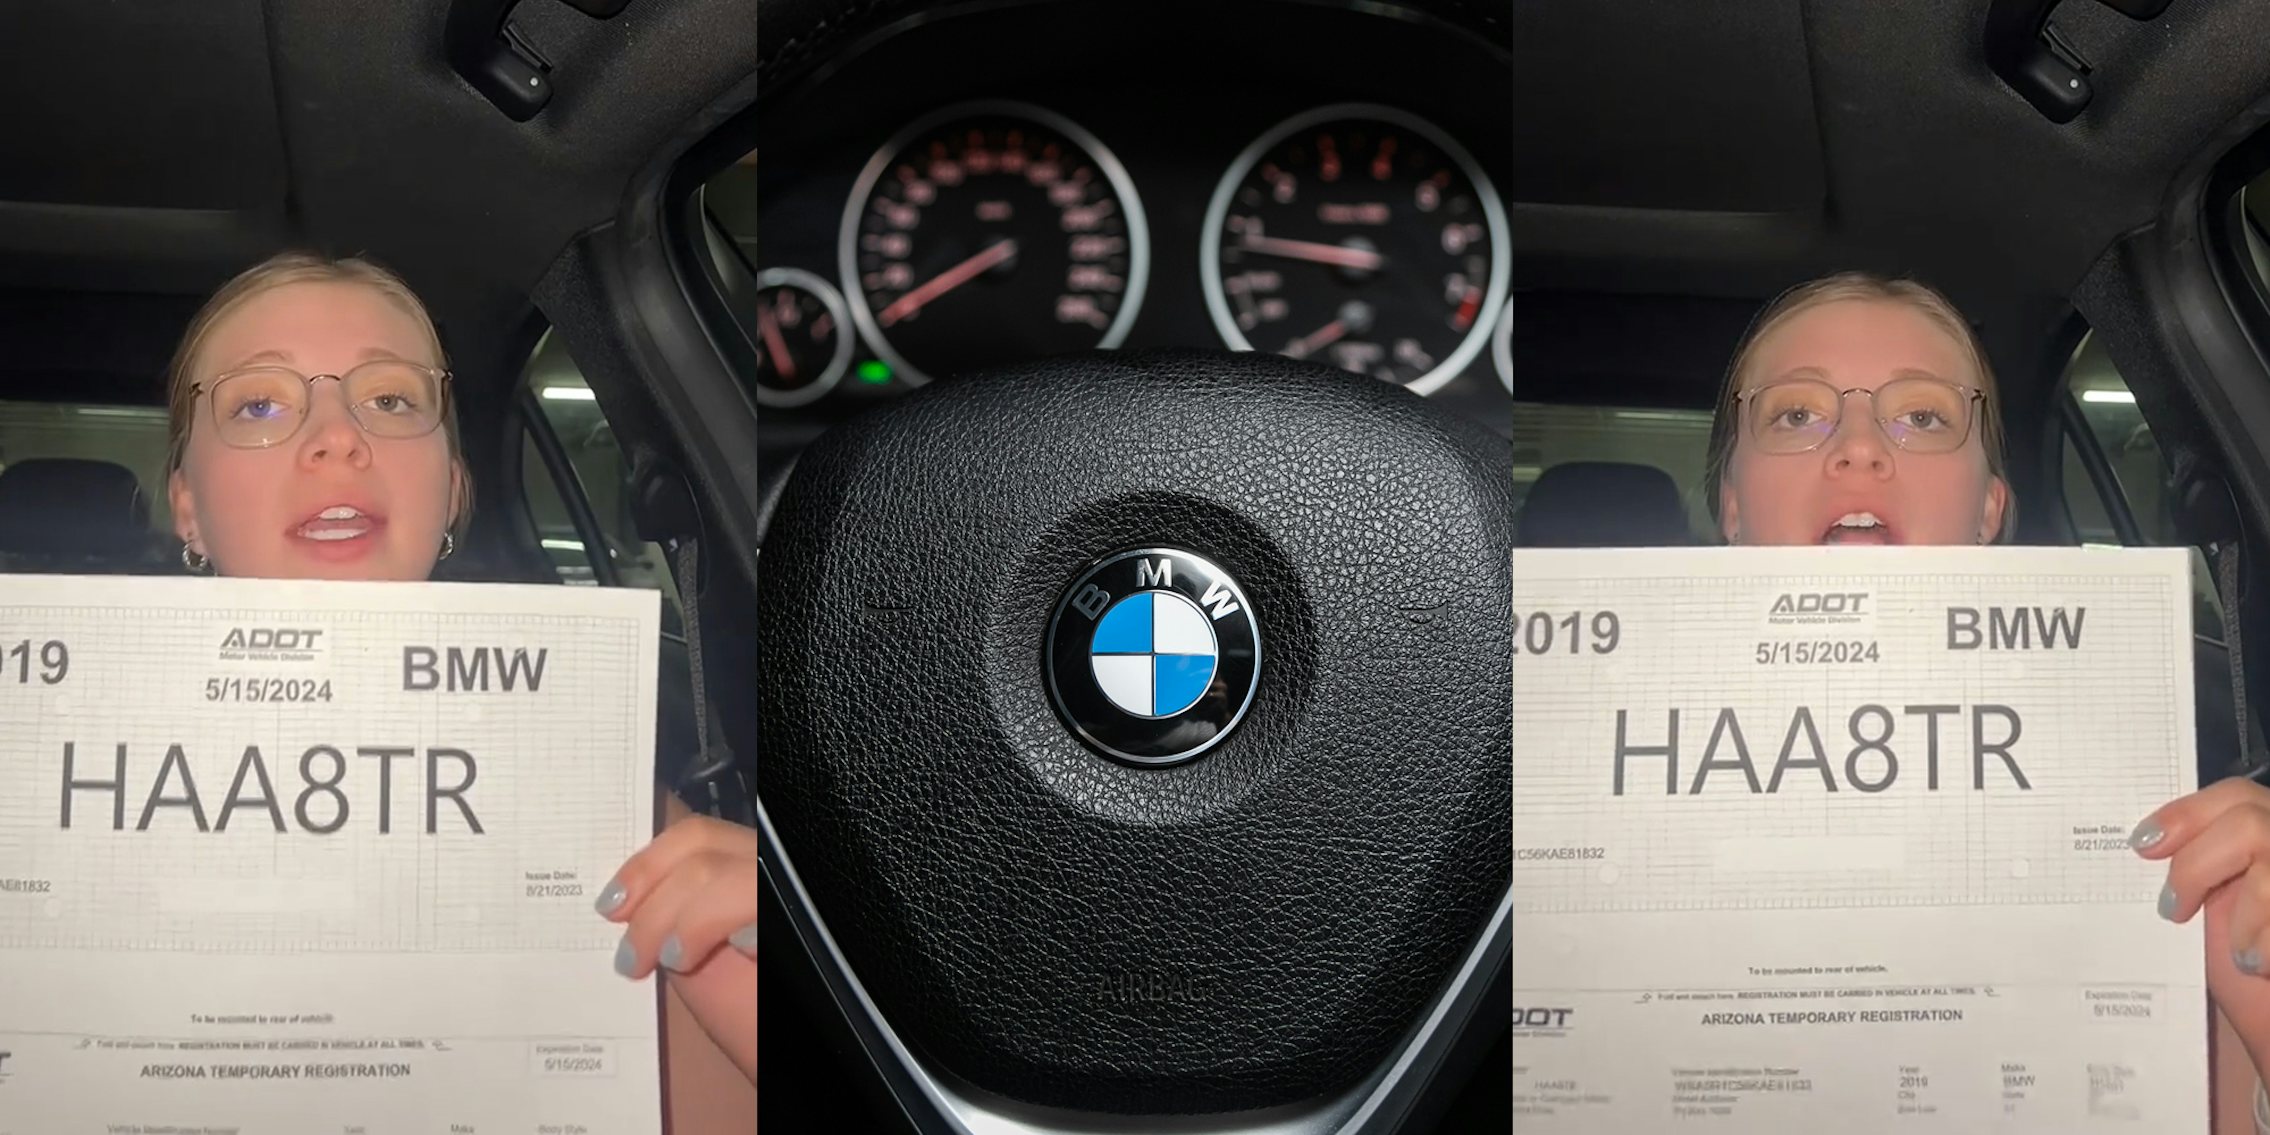 woman in car holding up license plate numbers HAA8TR on paper while speaking (l) BMW steering wheel with logo (c) woman in car holding up license plate numbers HAA8TR on paper while speaking (r)